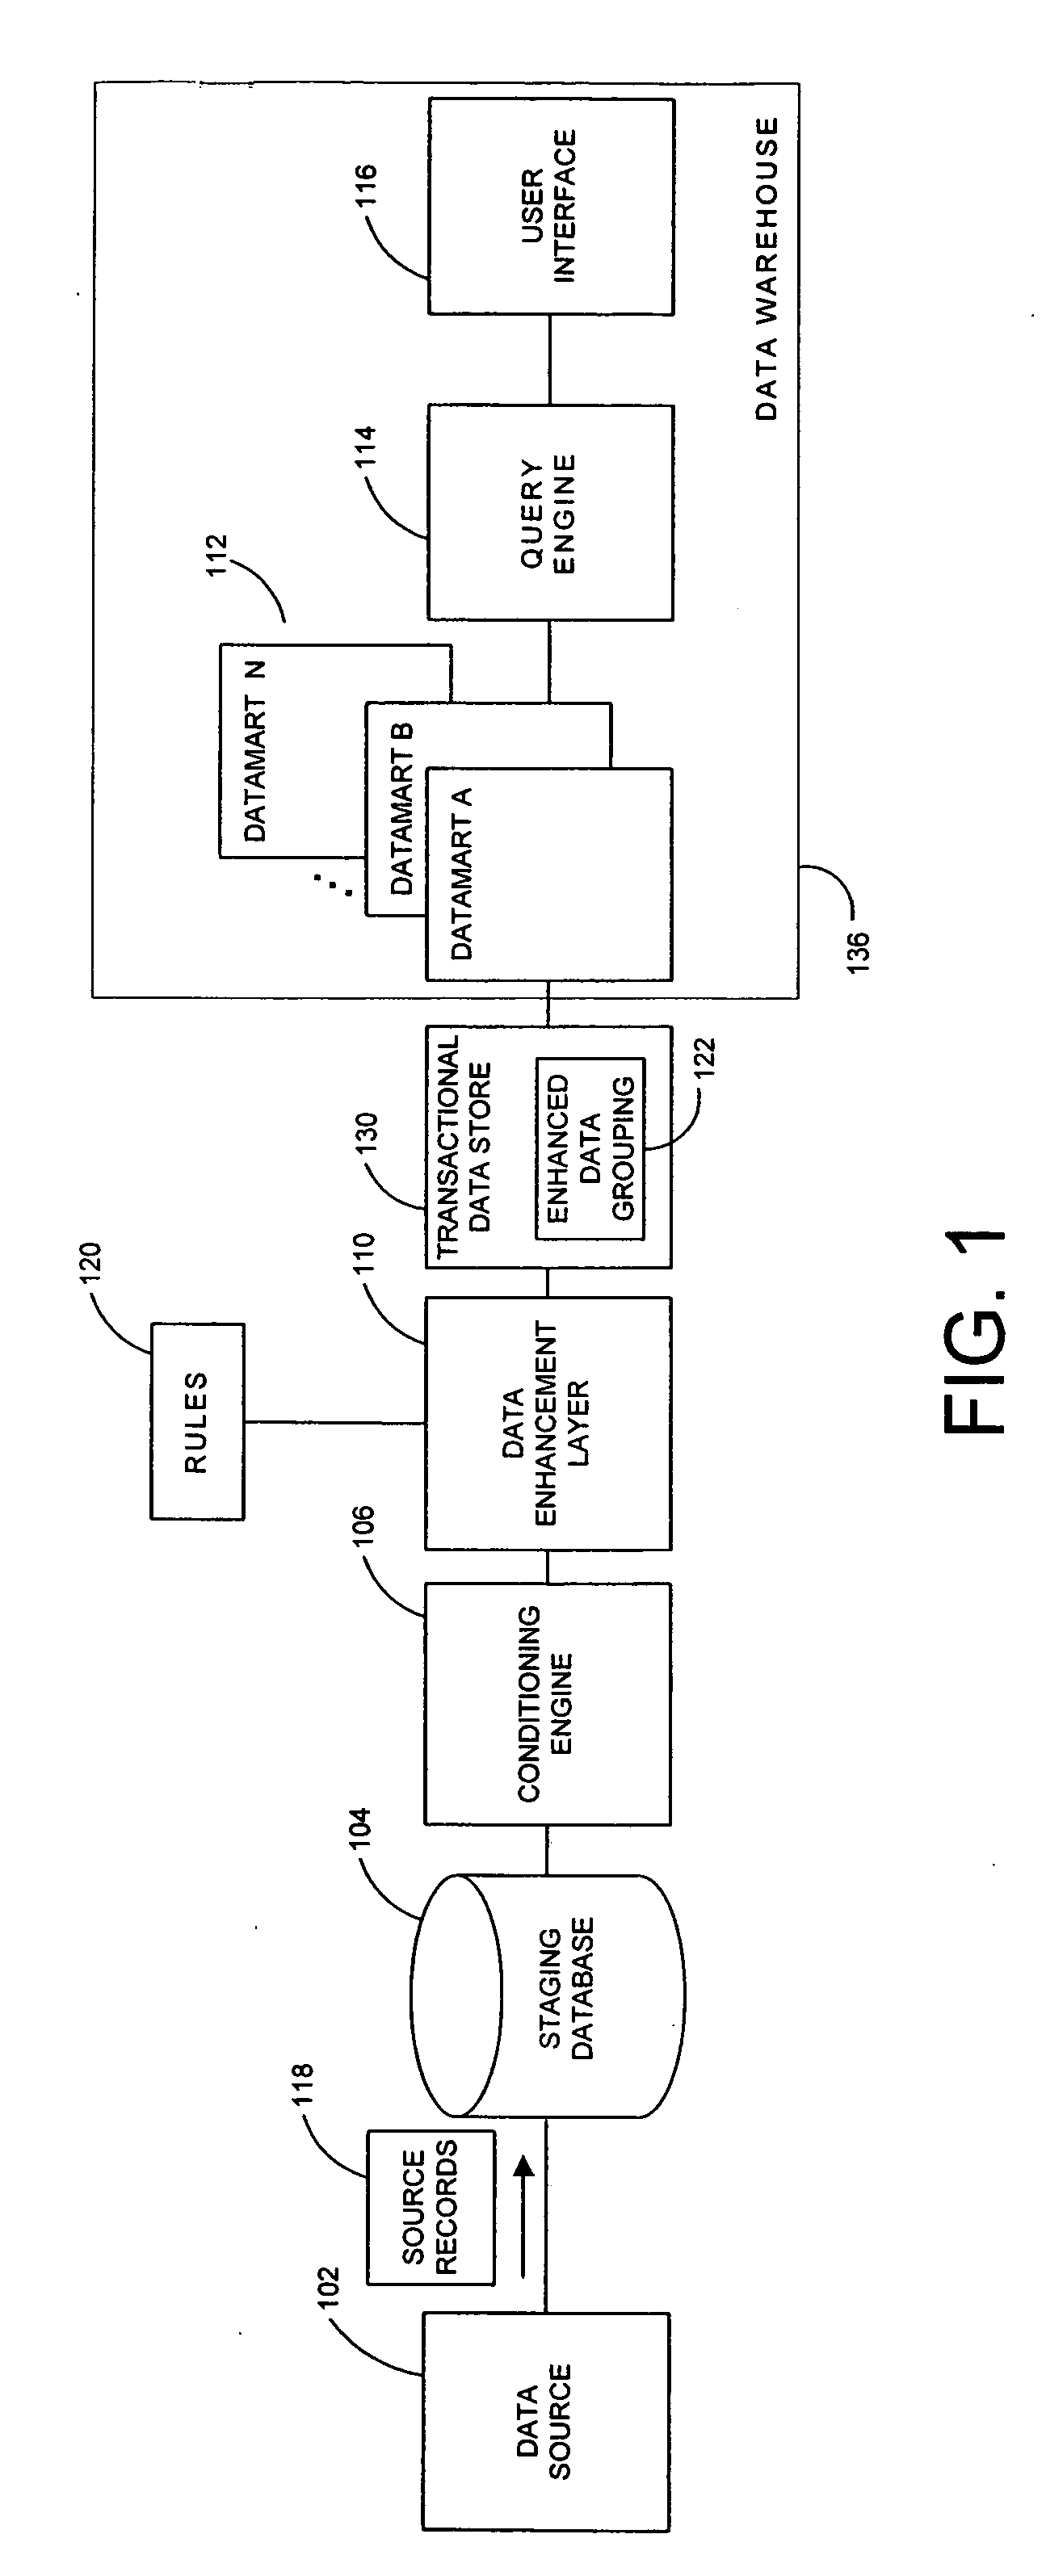 System and method for multidimensional extension of database information using inferred groupings